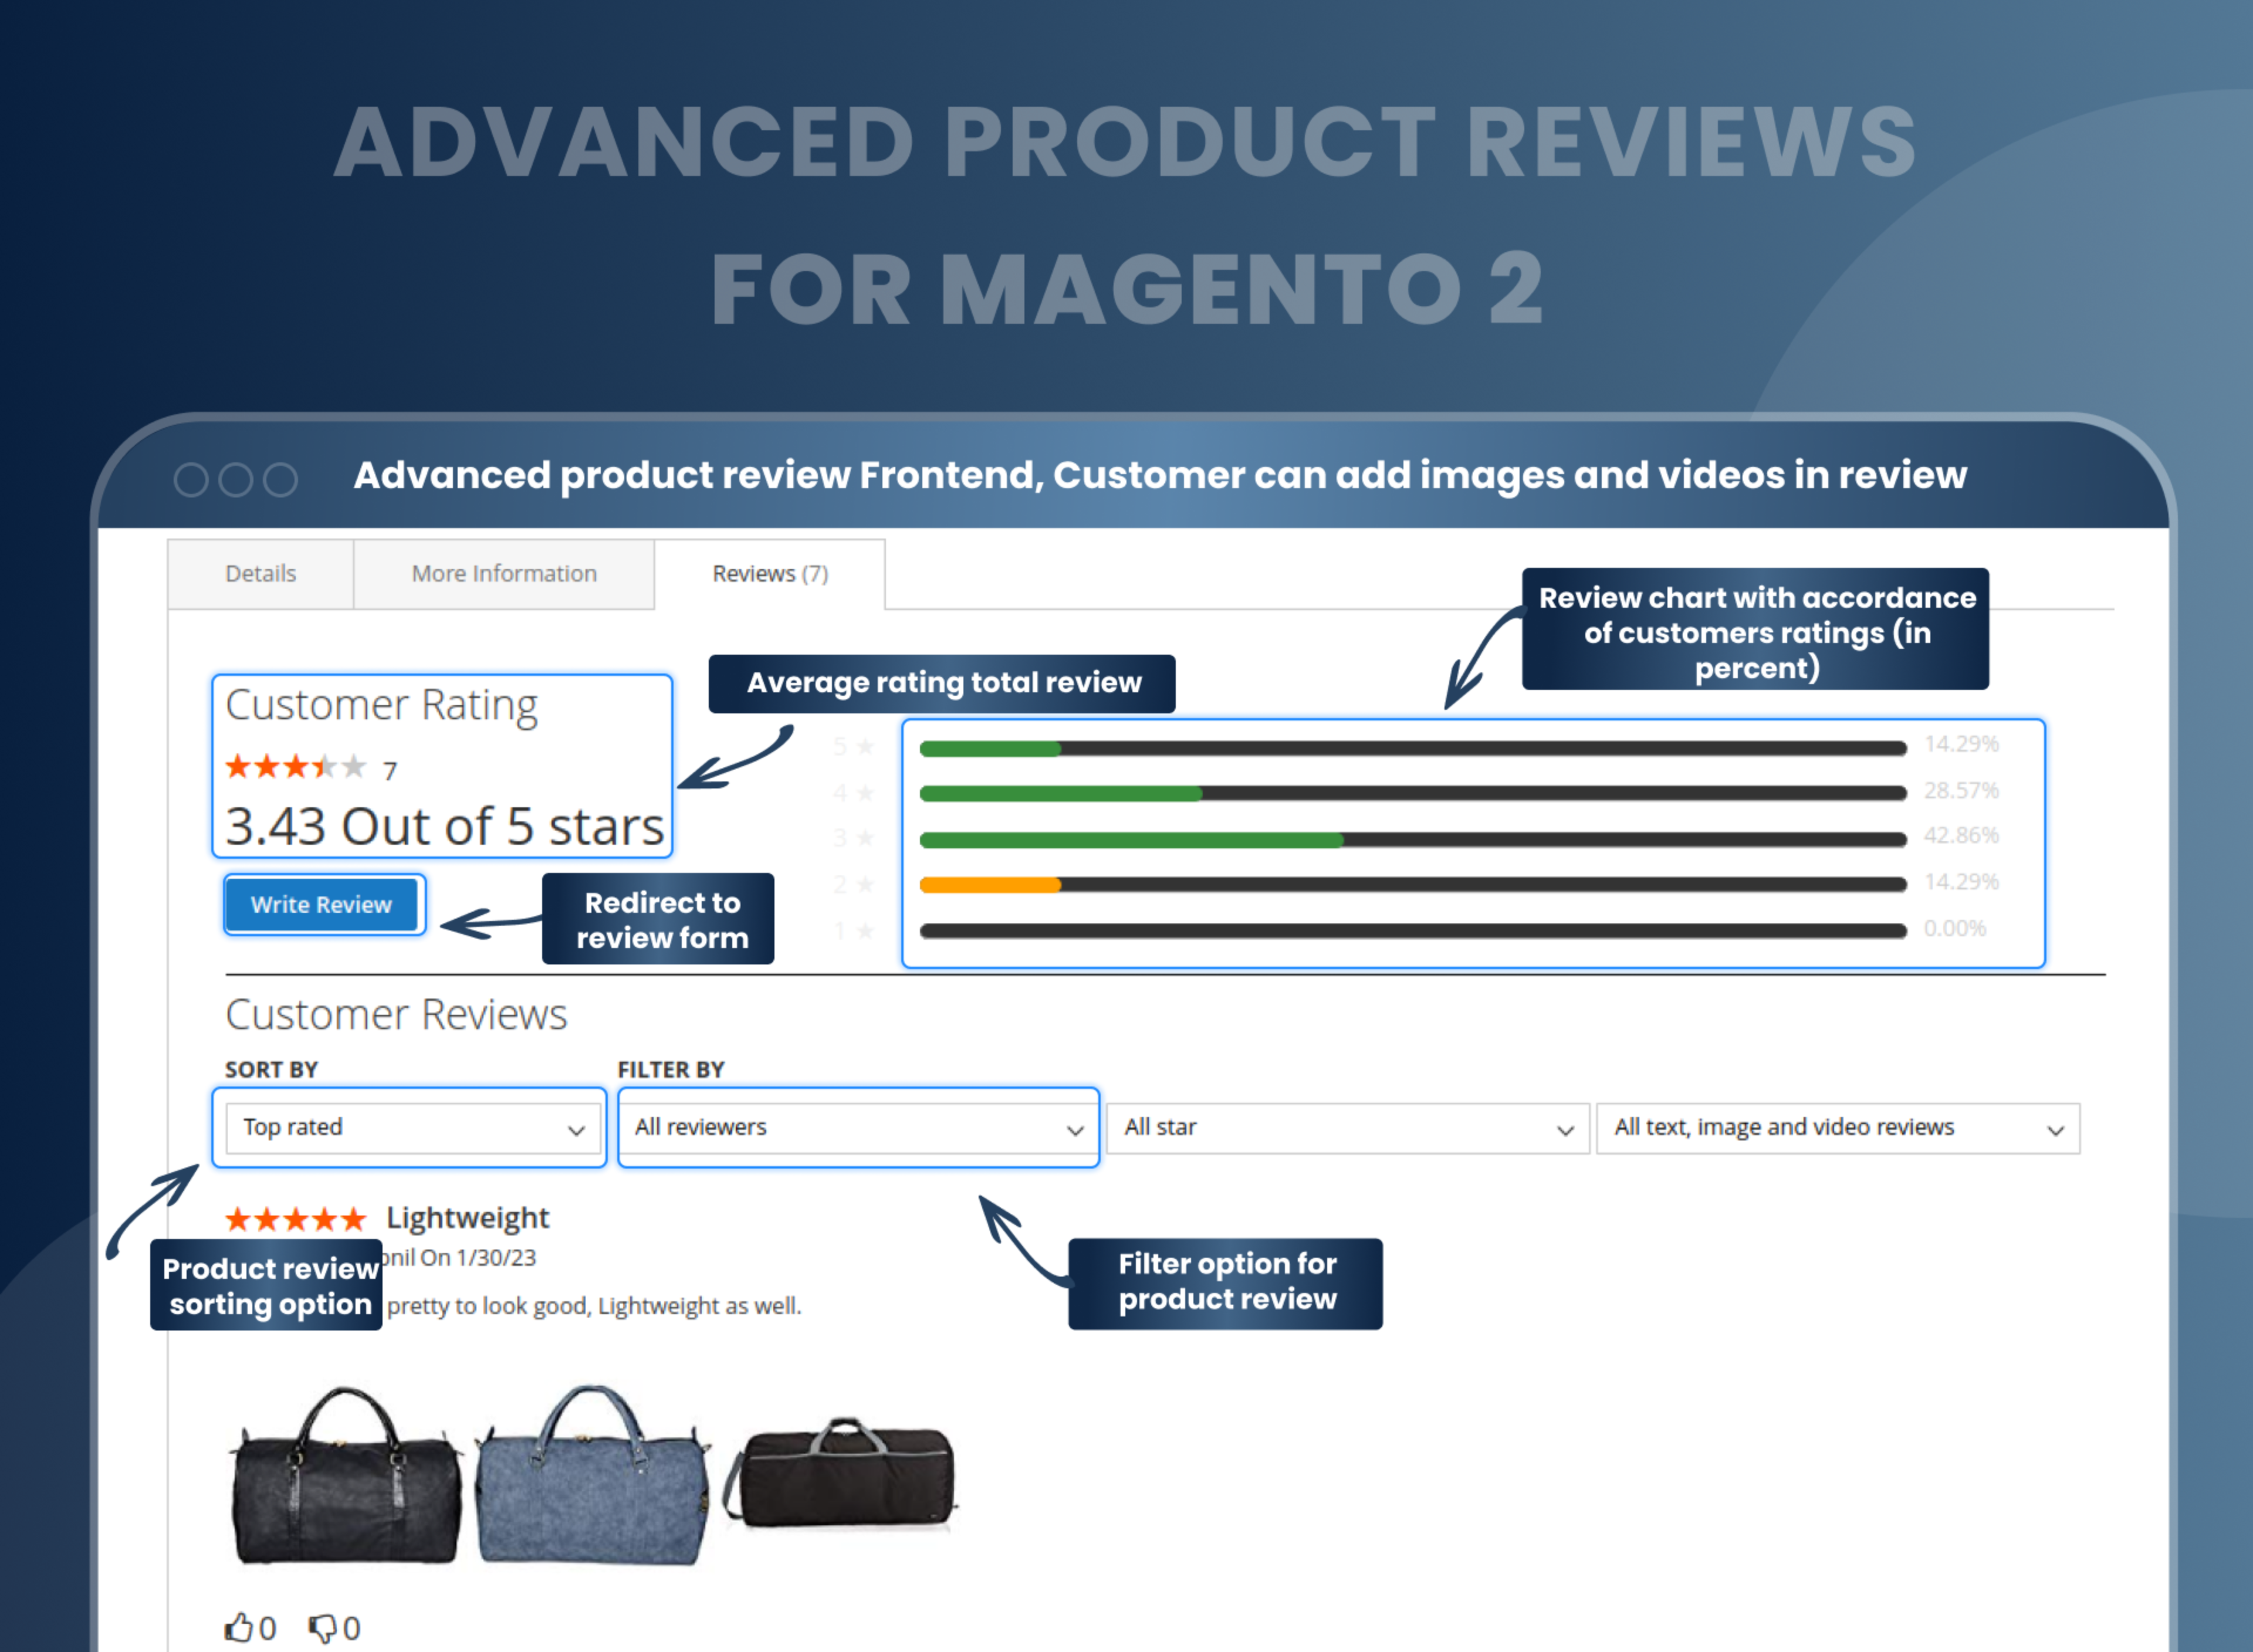 Advanced product review Frontend, Customer can add images and videos in review 